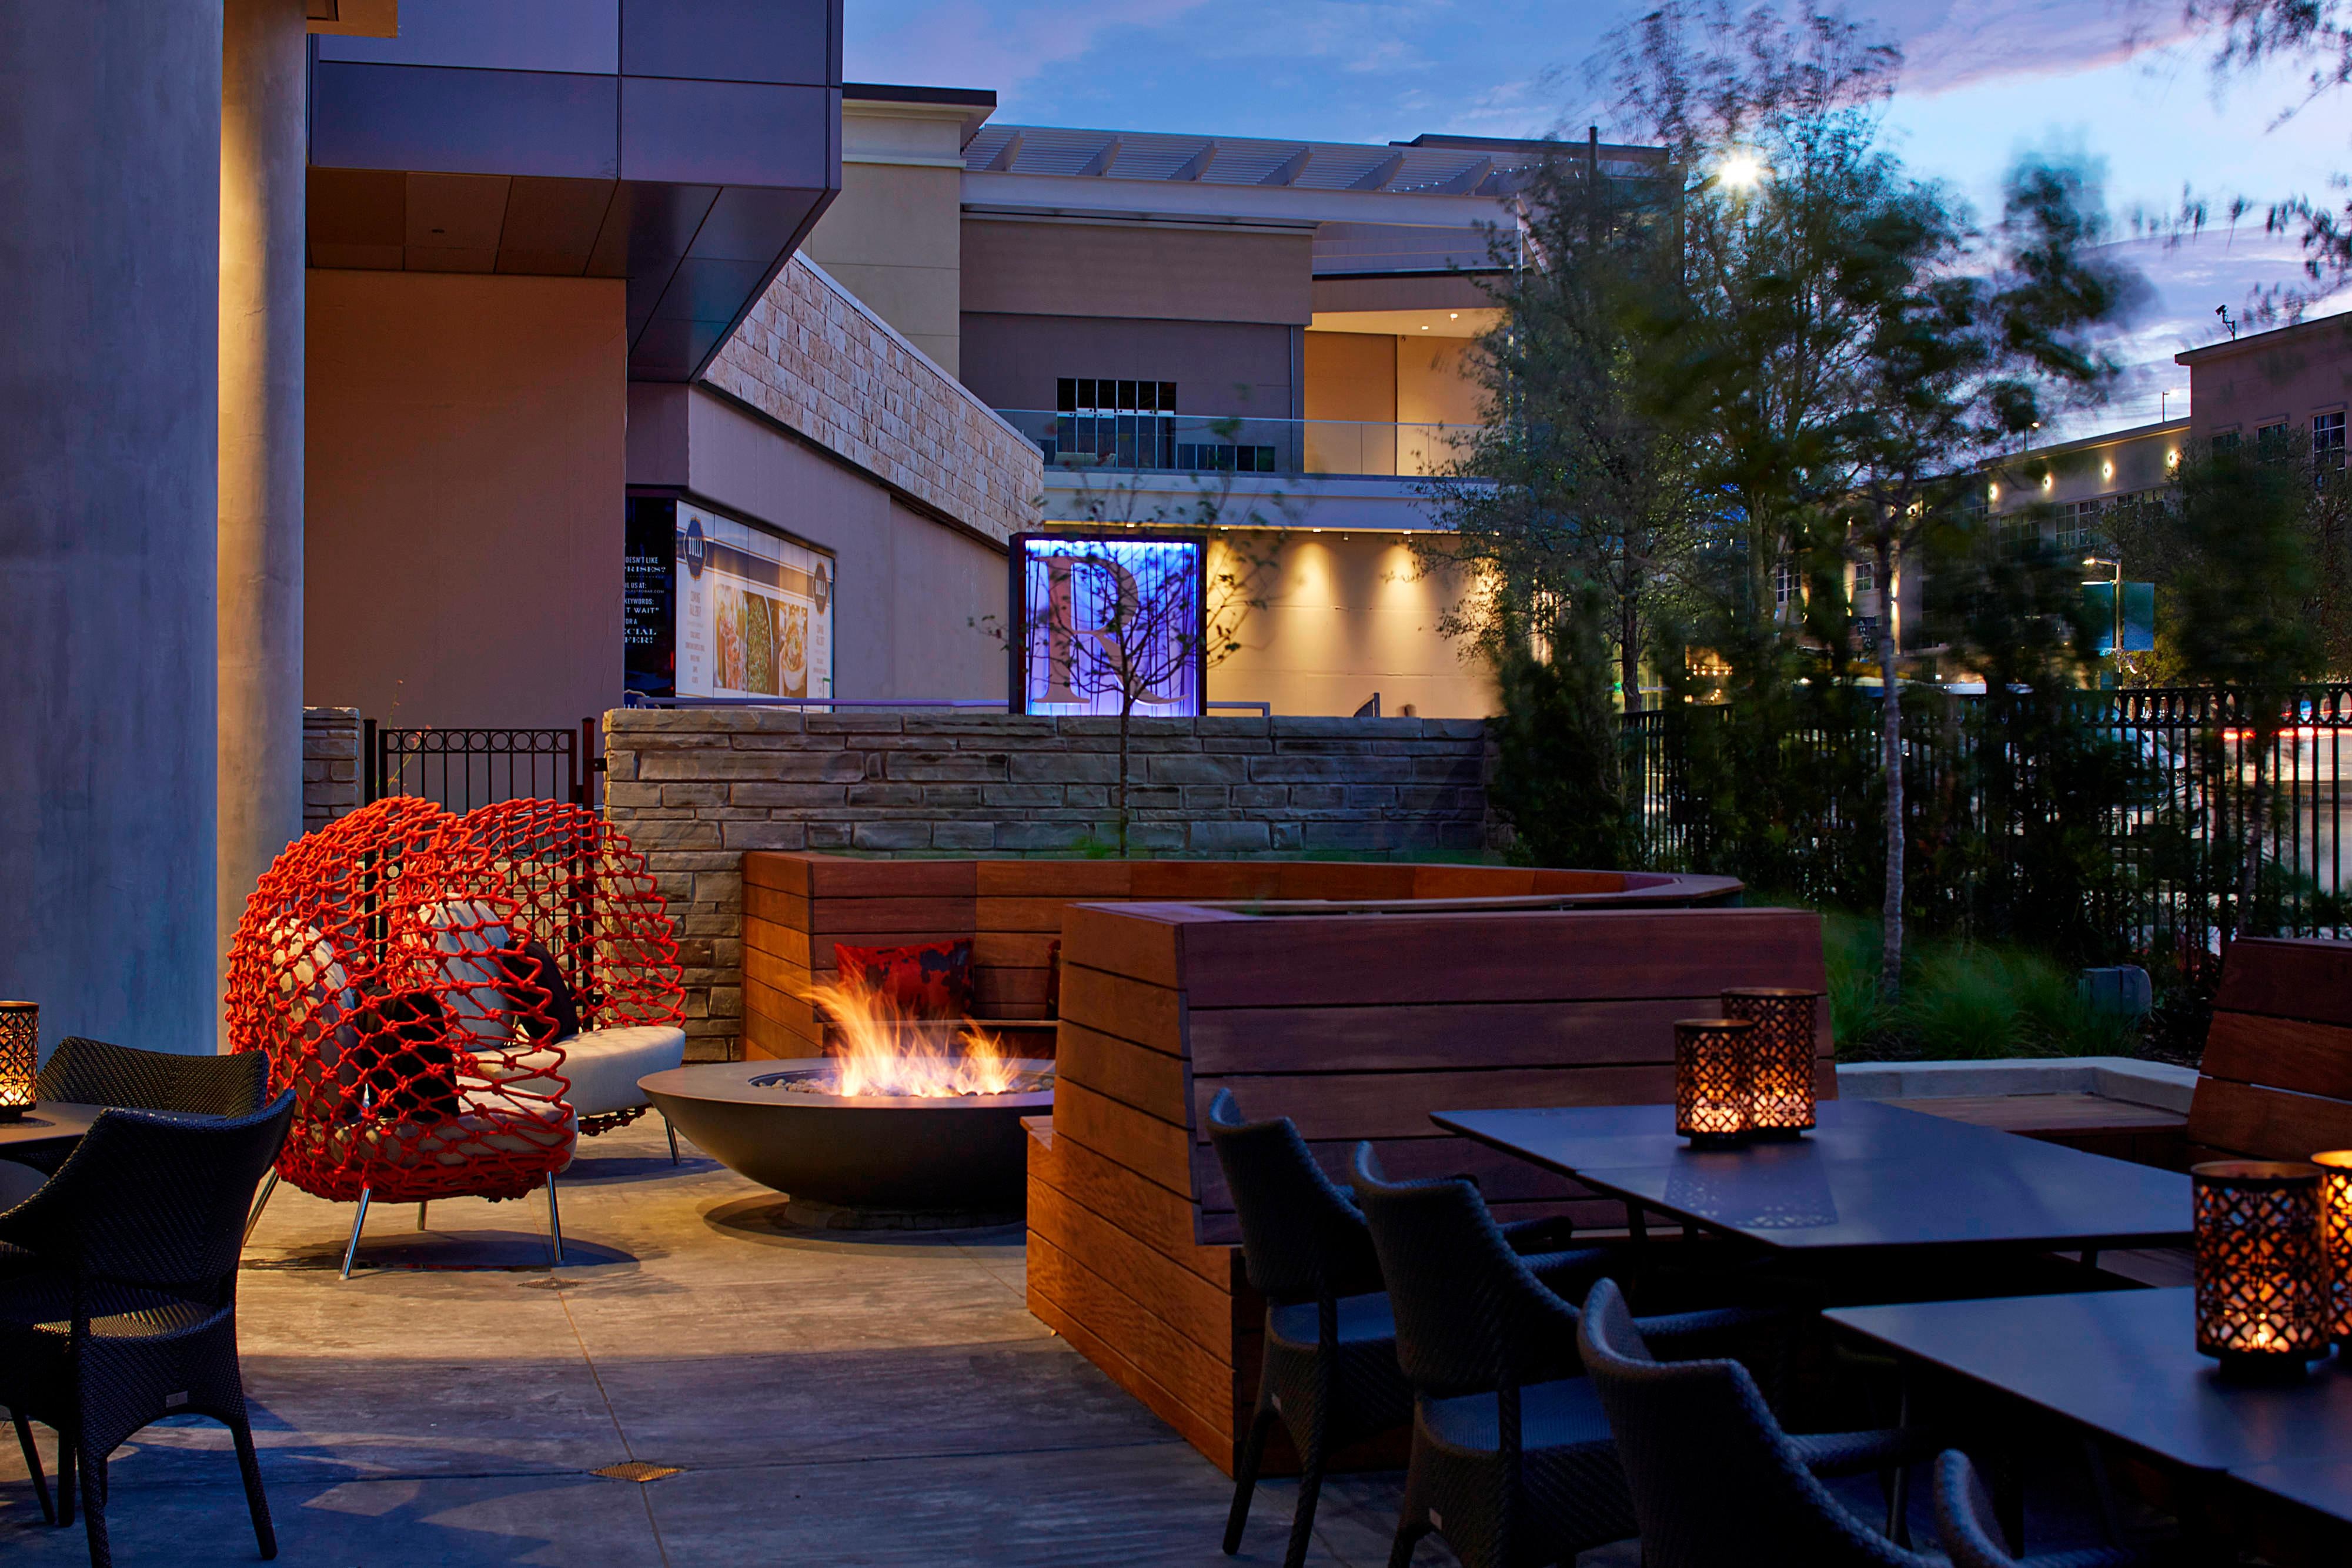 Outdoor patio with fire pit.